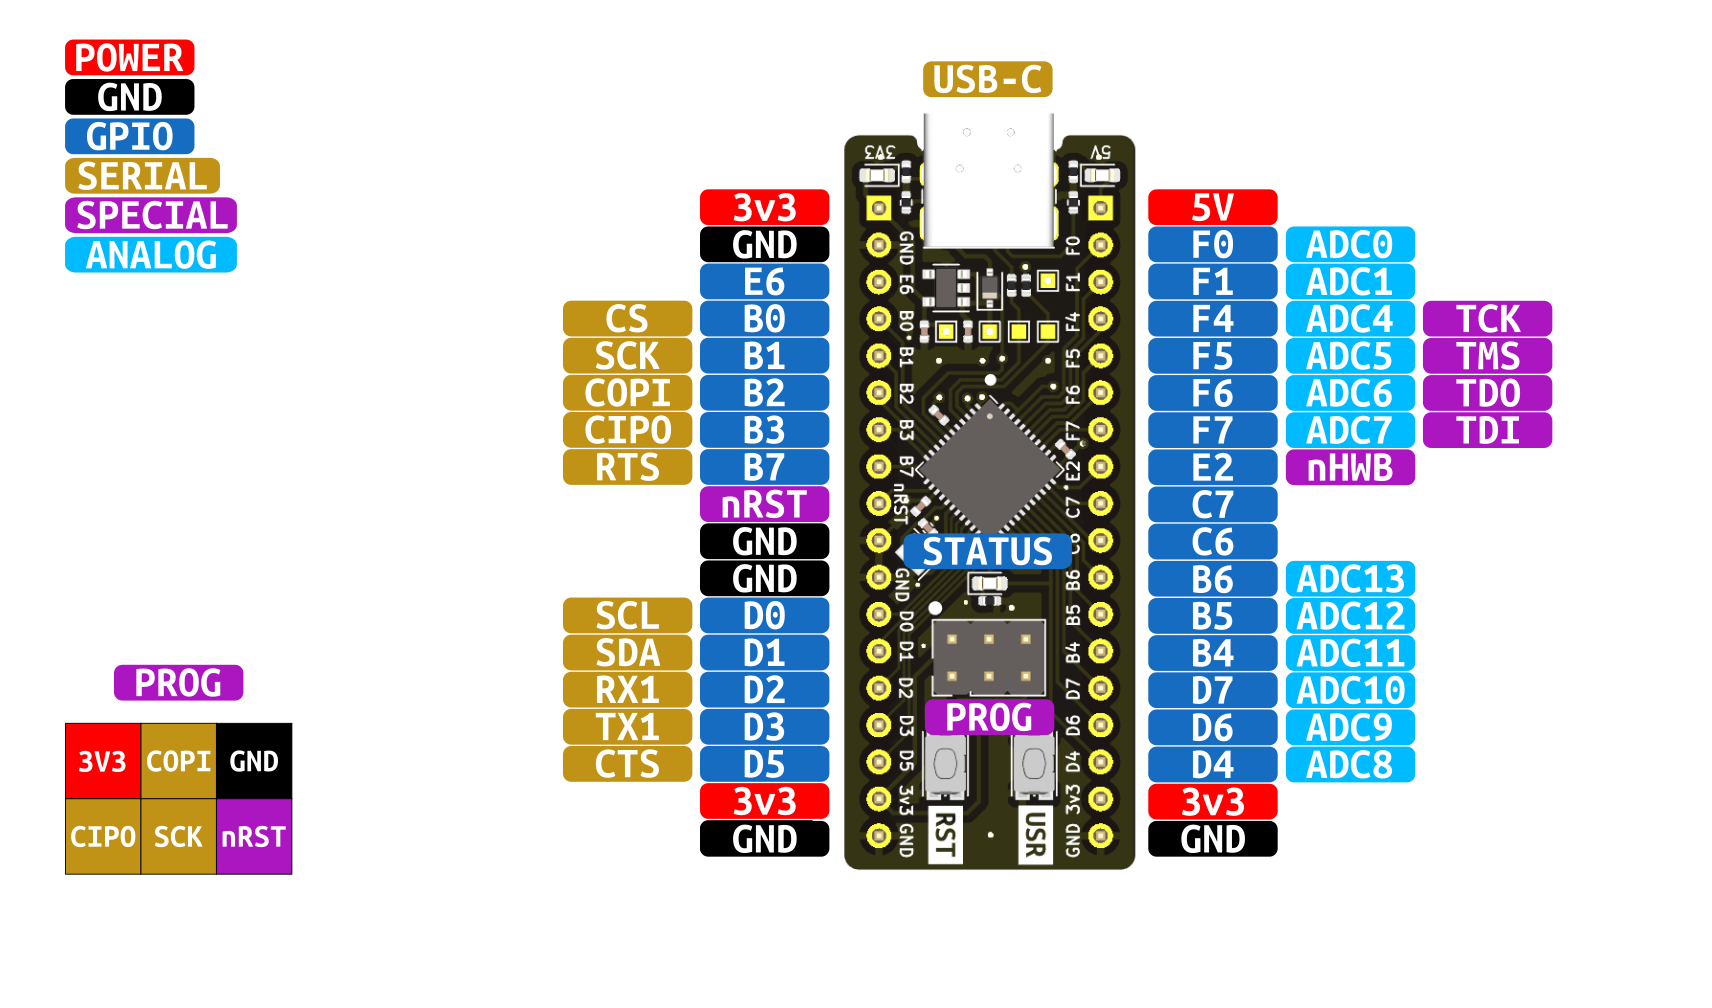 pinout description of all the alt functions of the atmega32u4 breakout board